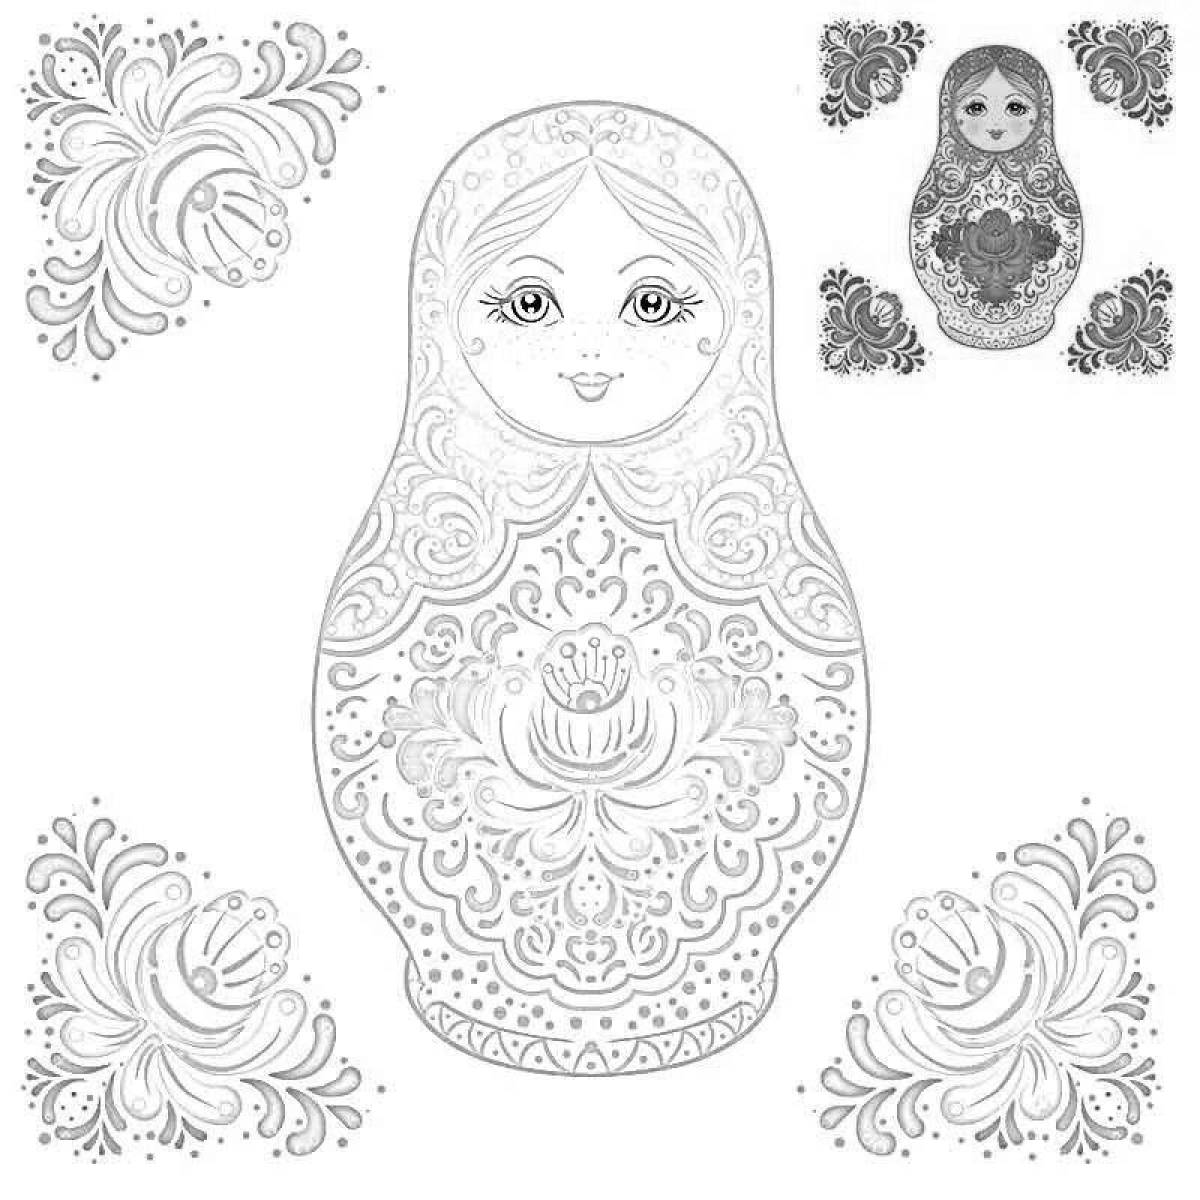 Exquisite Russian doll coloring book